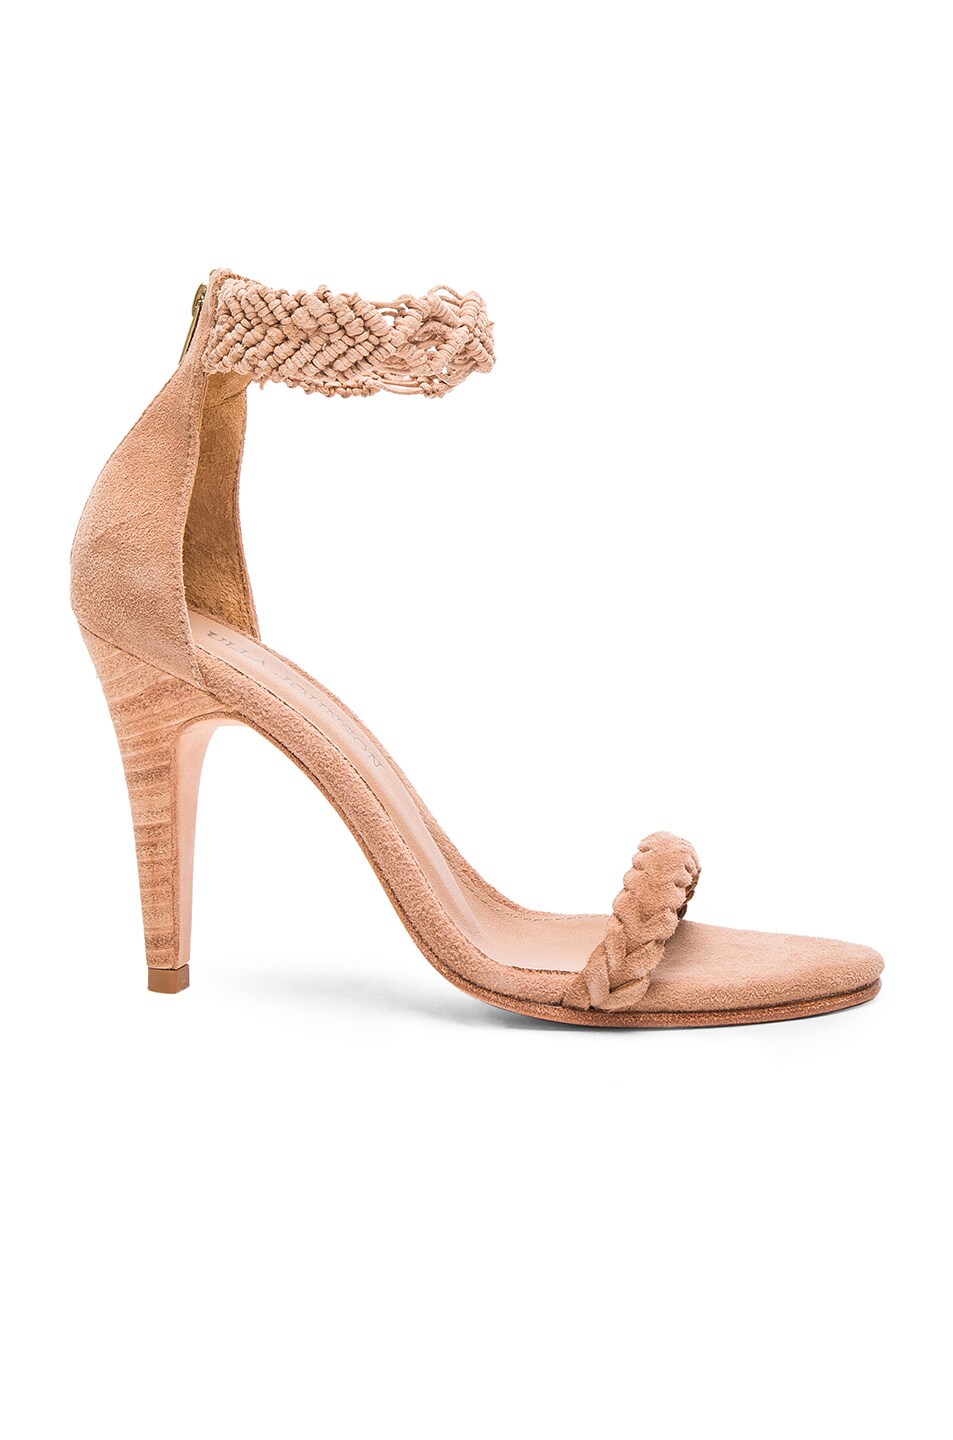 Image 1 of Ulla Johnson Suede Manu Heels in Taupe Suede